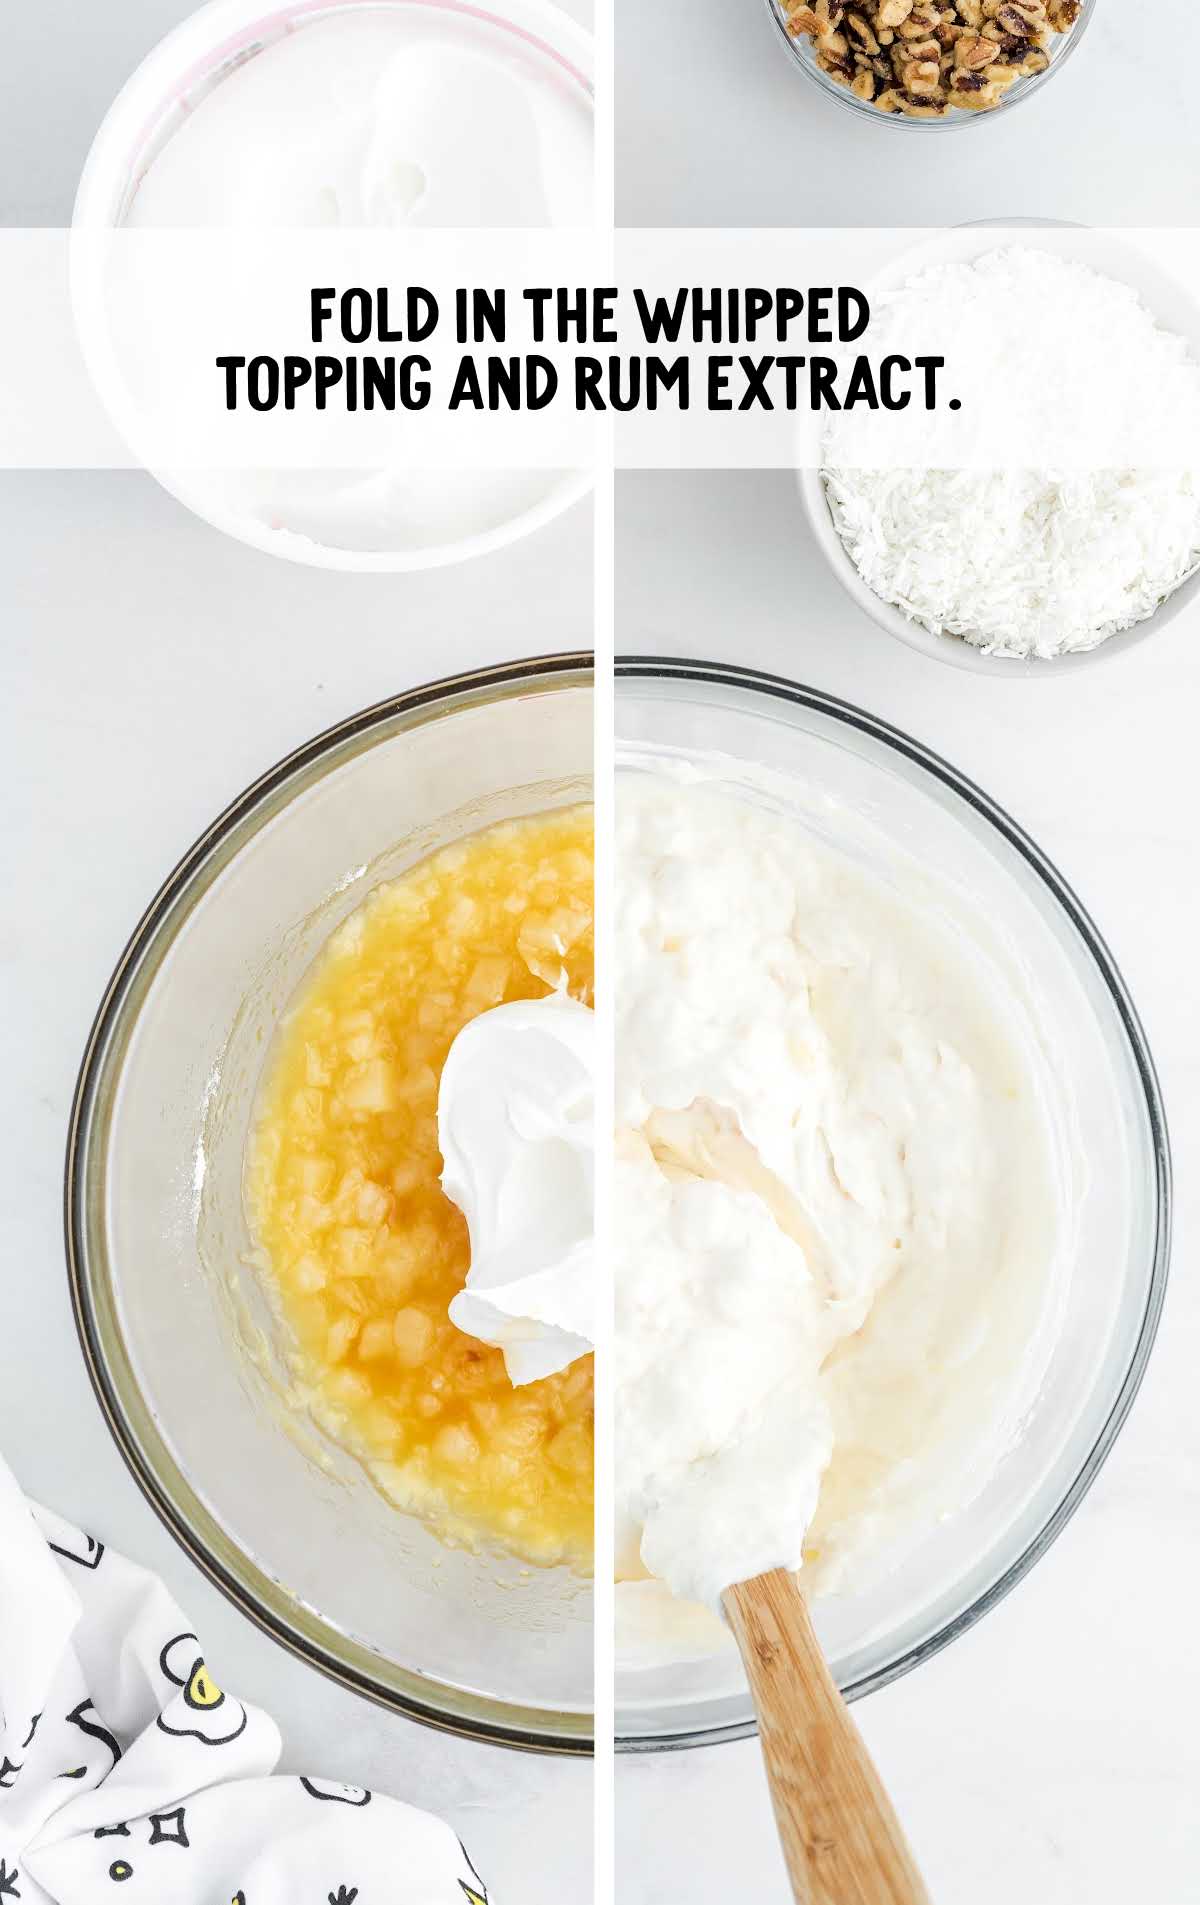 whipped topping and rum extract folded in a bowl